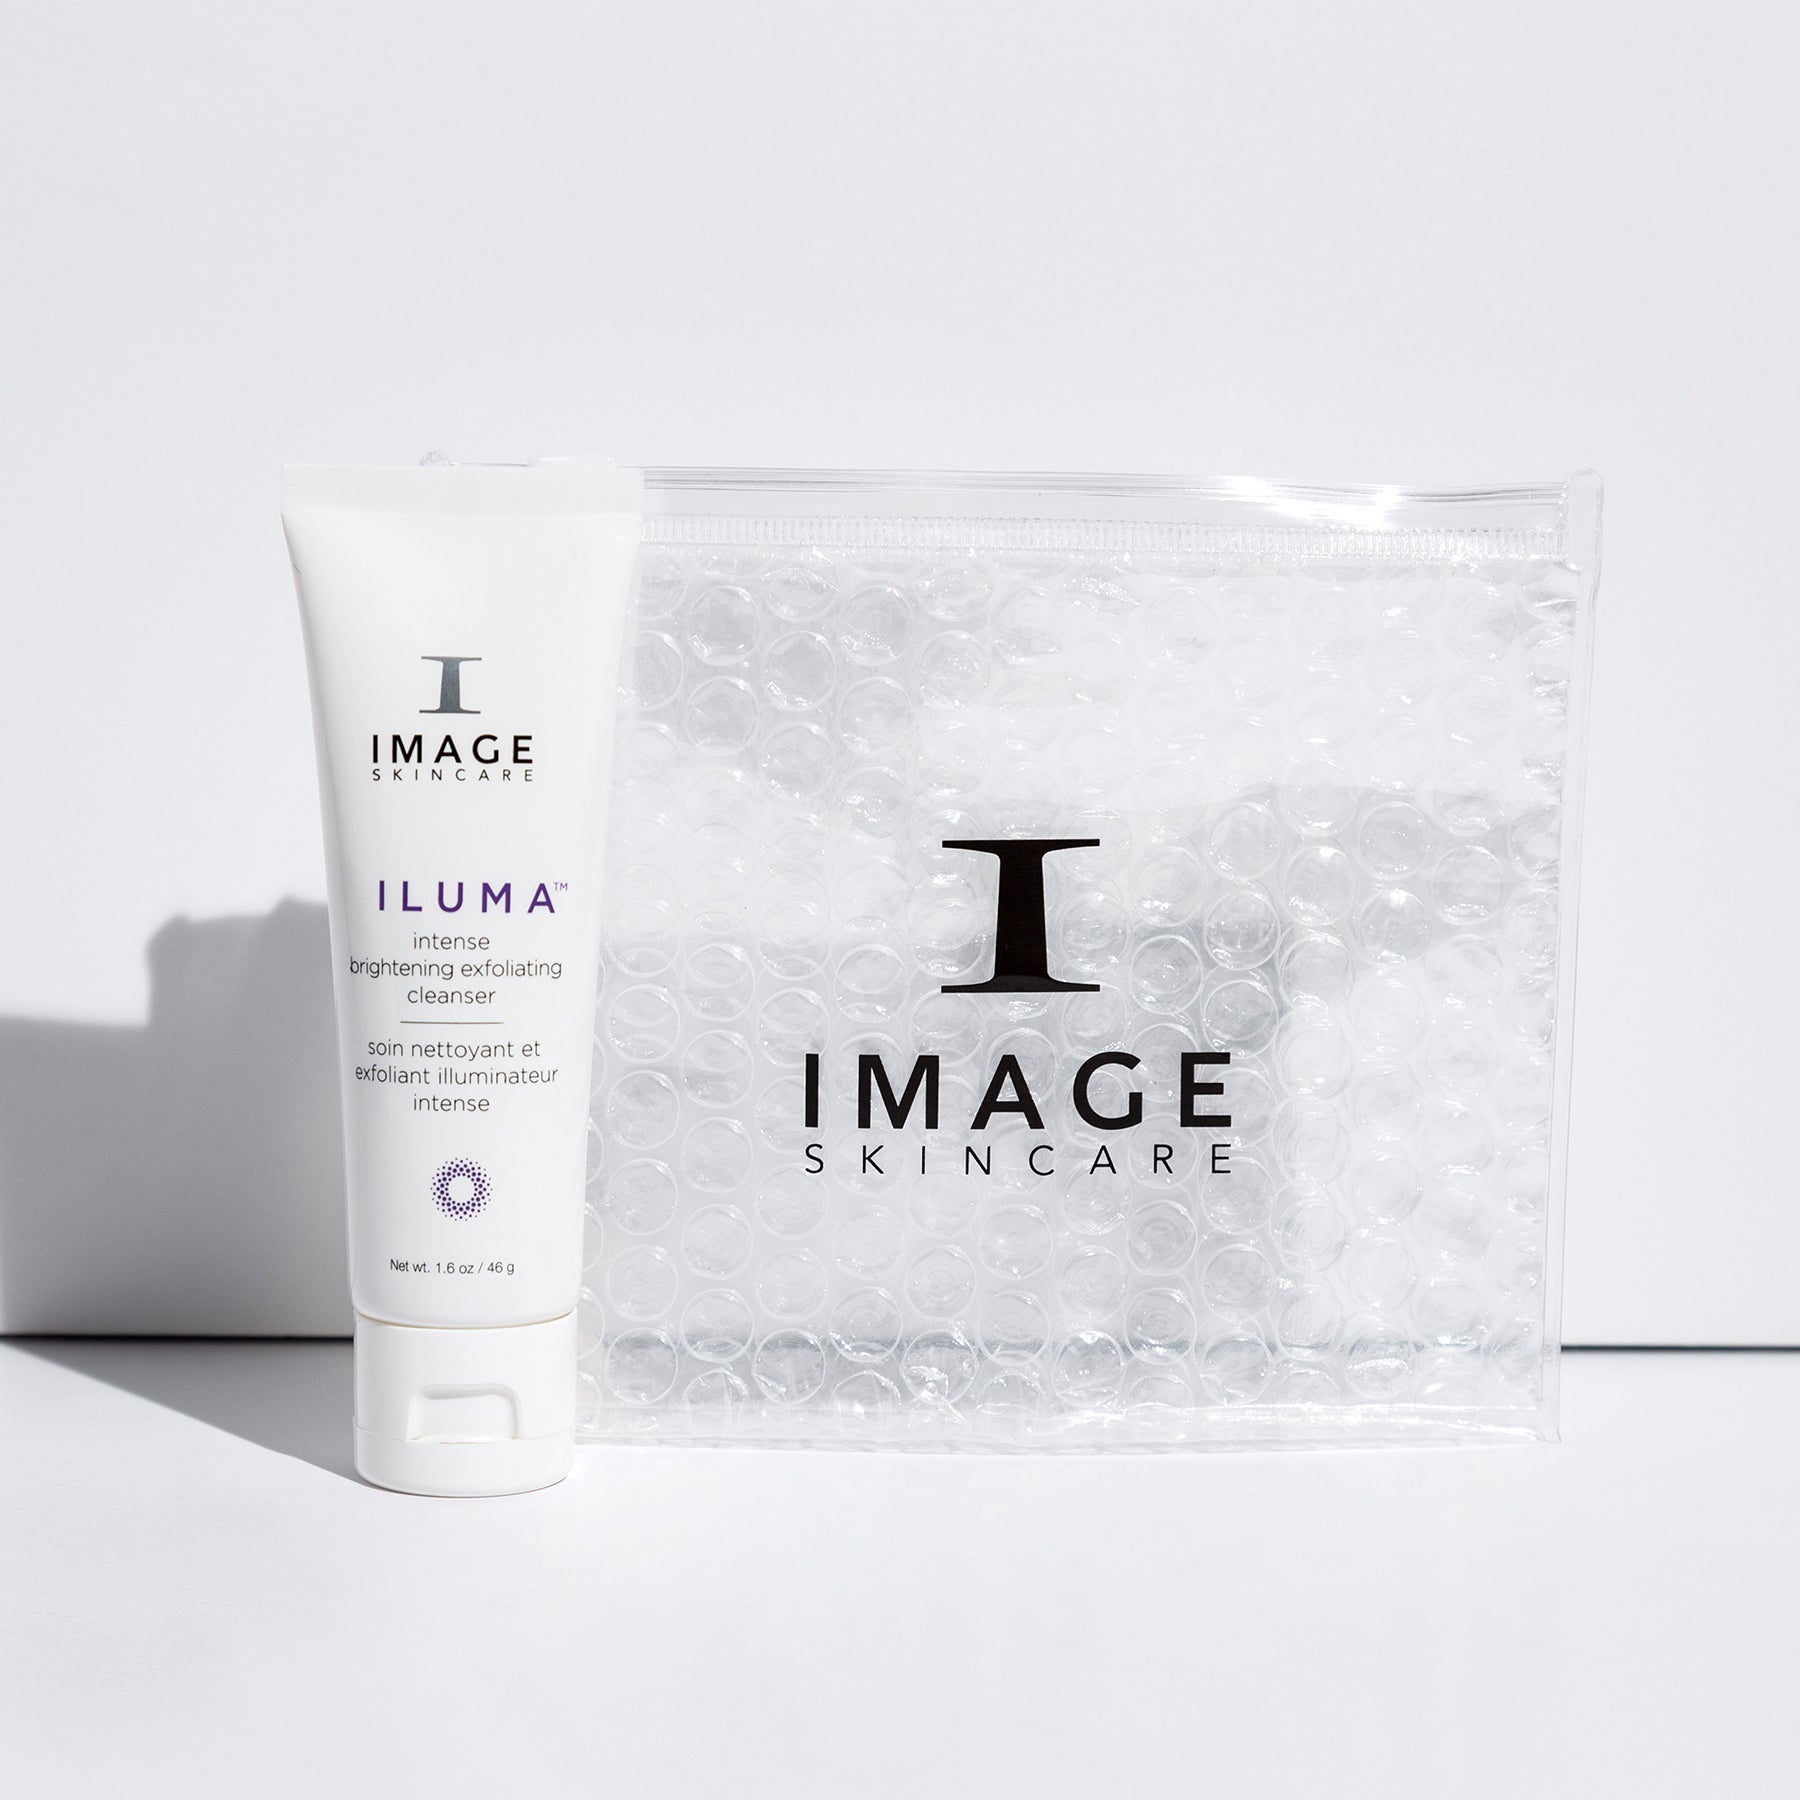 Discovery-size ILUMA Intense Brightening Exfoliating Cleanser | Image Skincare Official Site